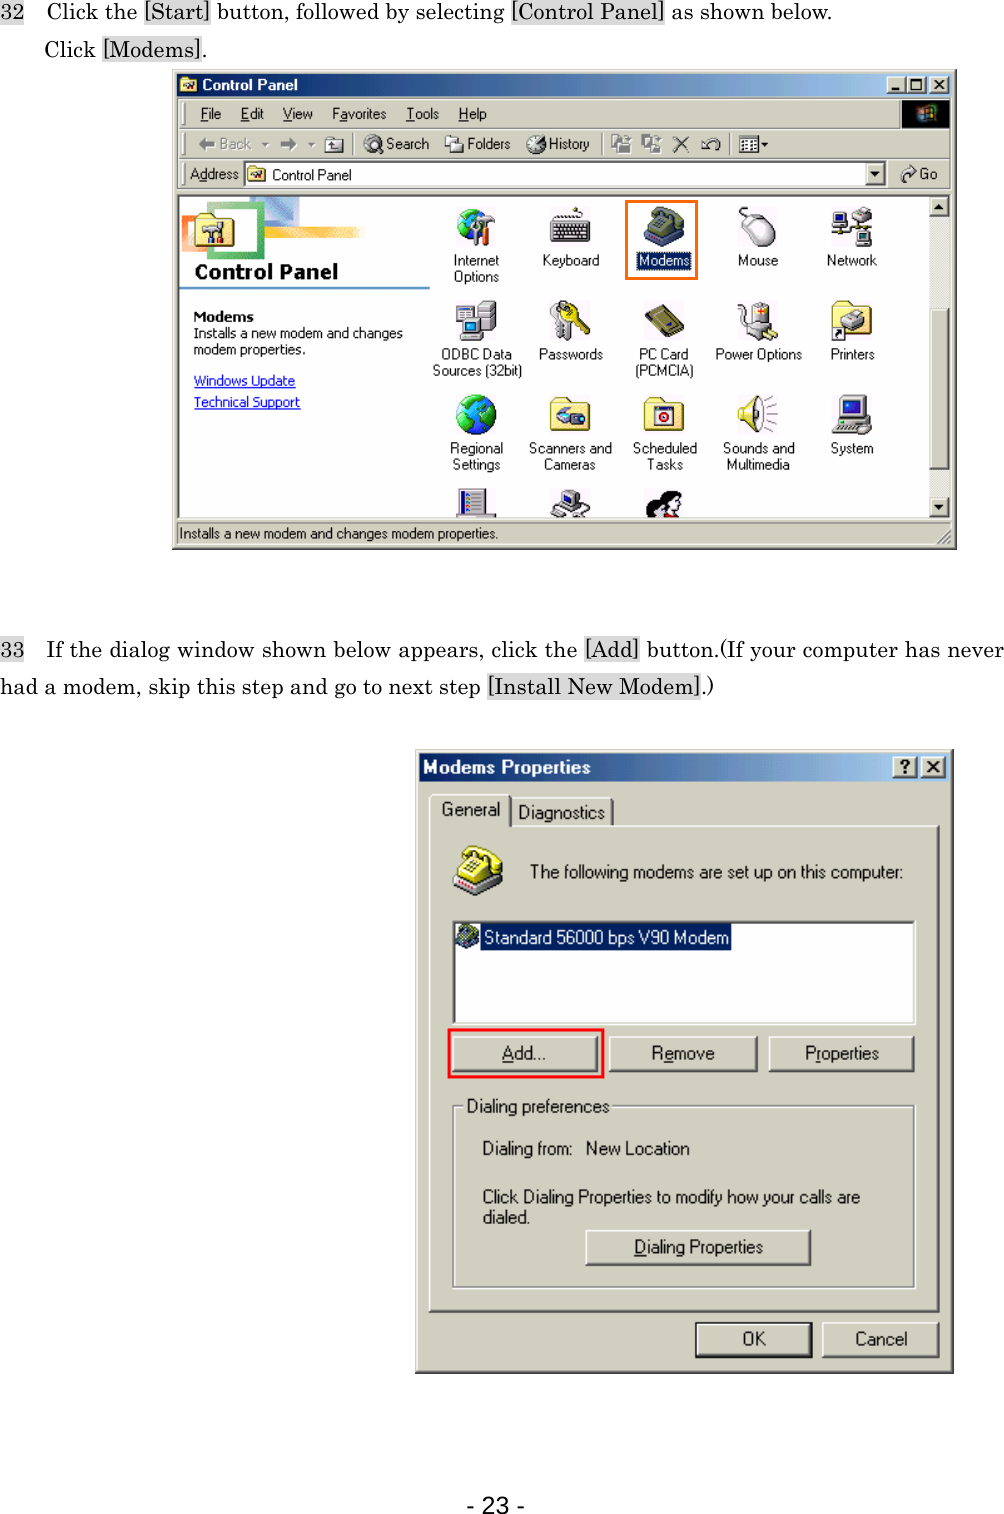 32    Click the [Start] button, followed by selecting [Control Panel] as shown below. Click [Modems].                33    If the dialog window shown below appears, click the [Add] button.(If your computer has never had a modem, skip this step and go to next step [Install New Modem].)     - 23 -  